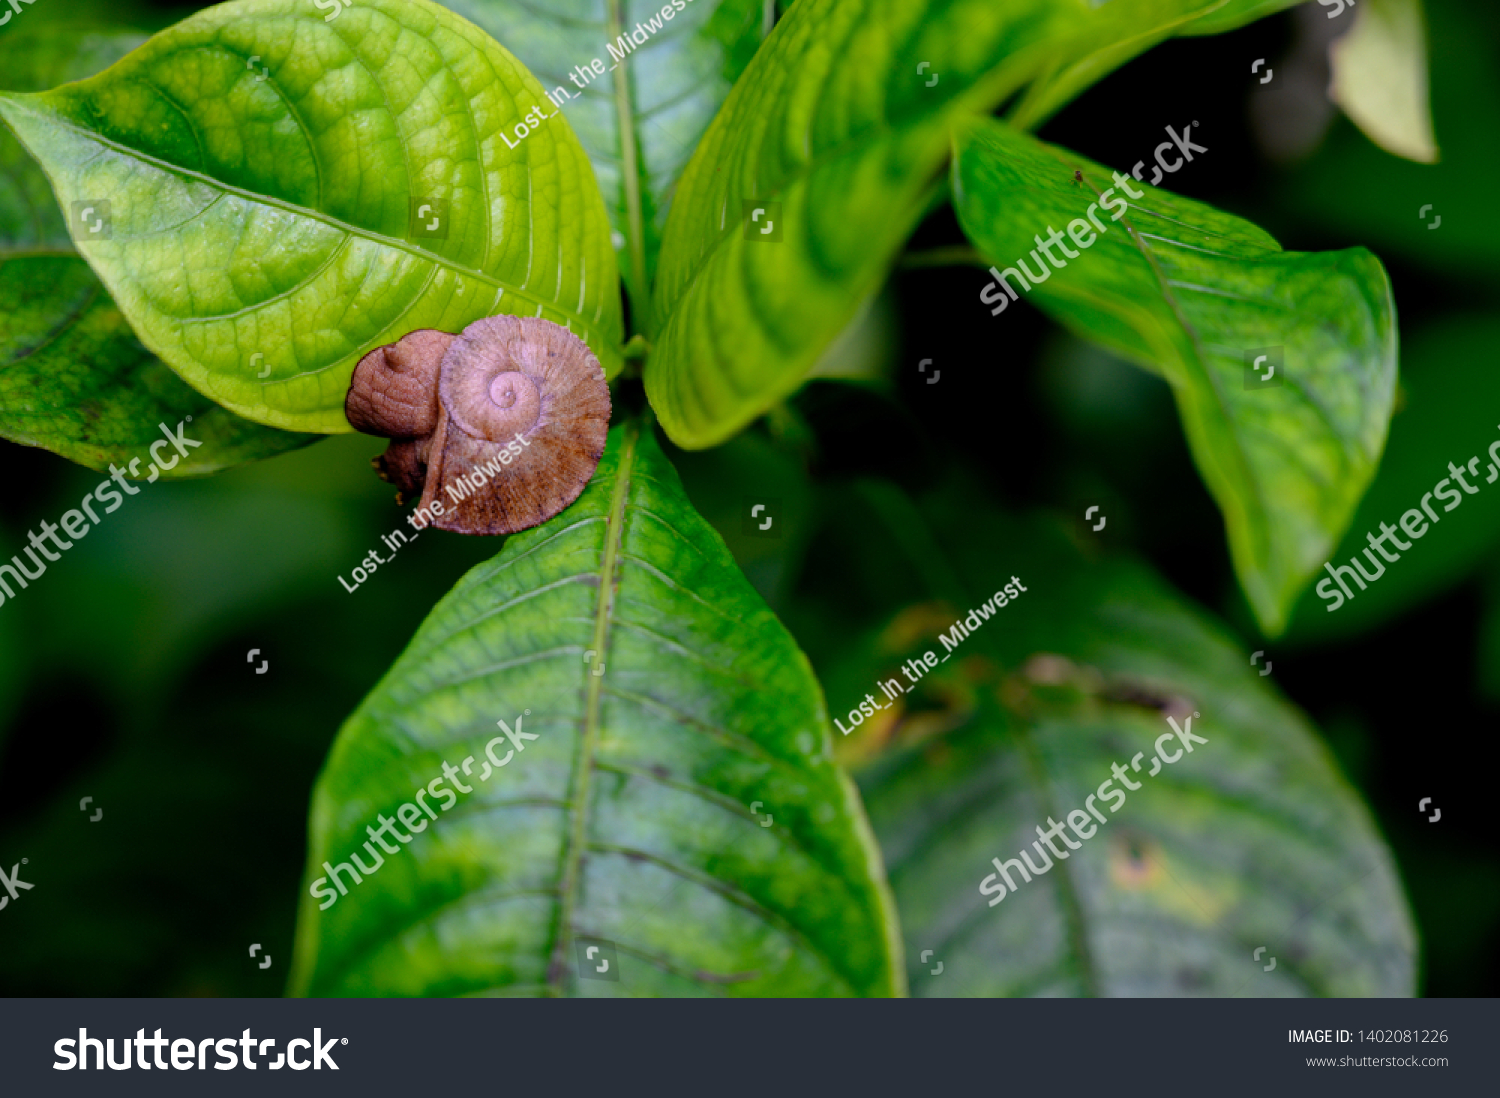 Tree Snail on leaves in El Yunque National Forest, Puerto Rico #1402081226